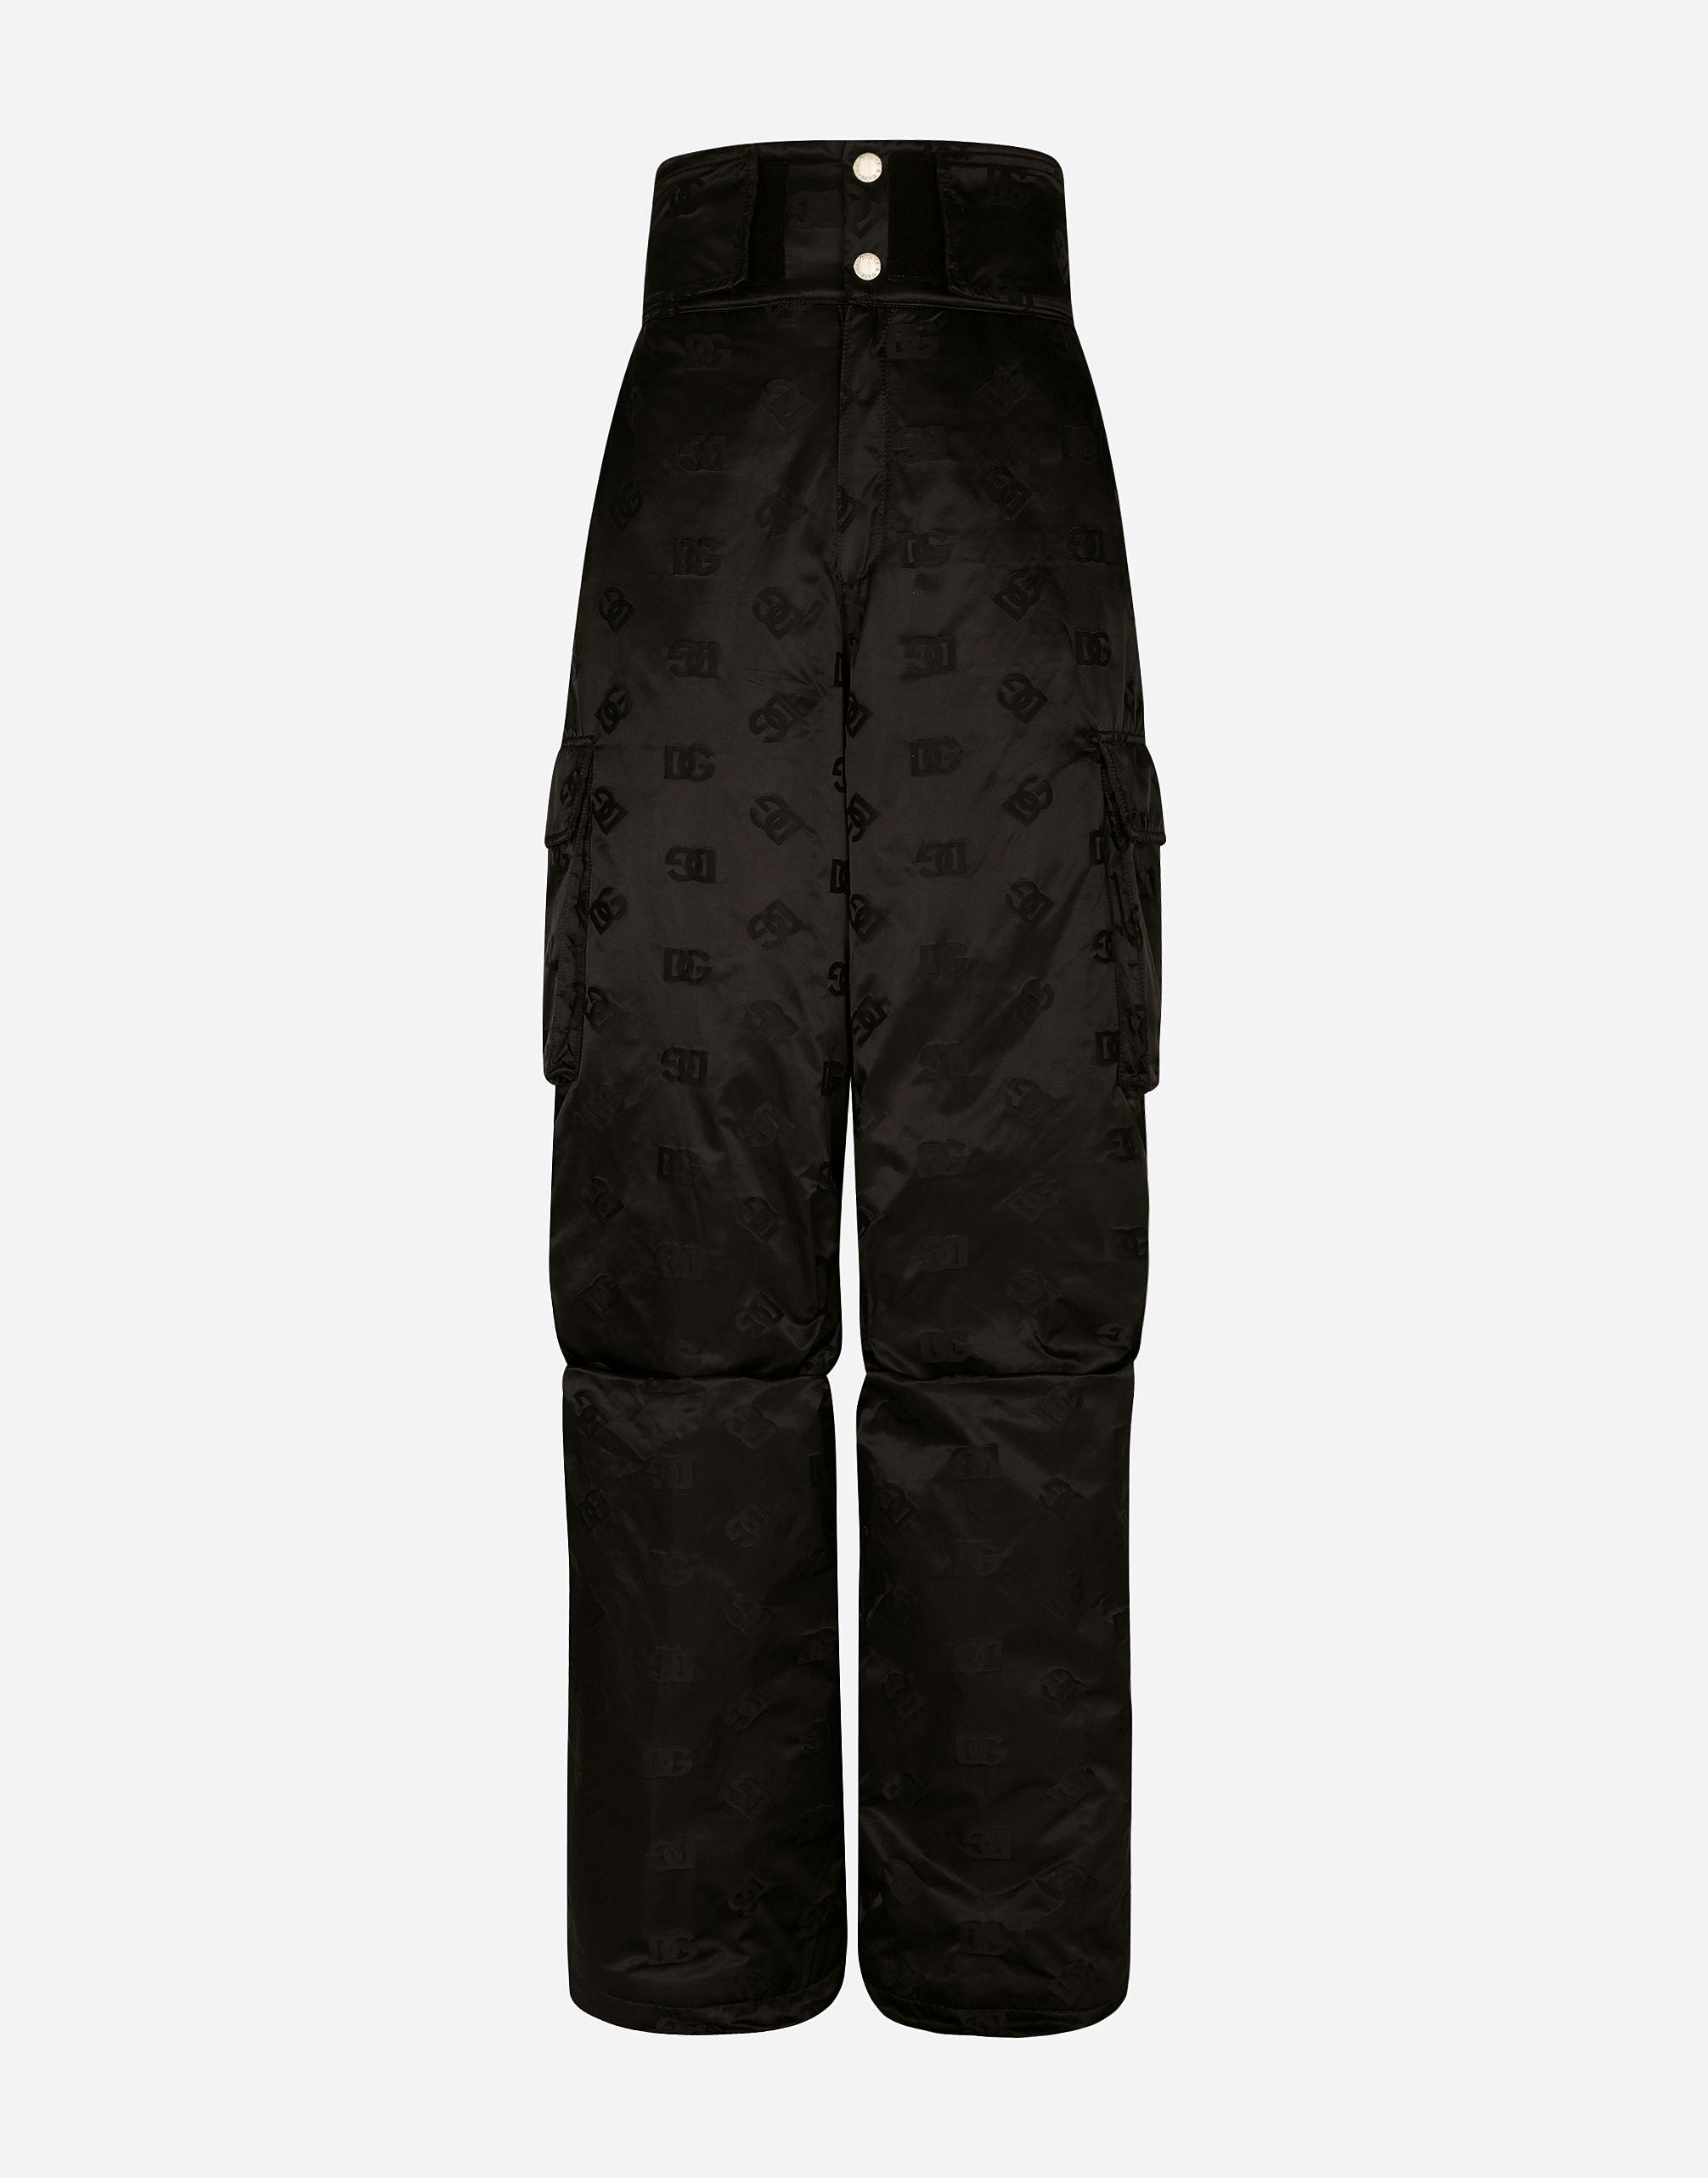 Satin cargo pants with all-over jacquard DG detail in Black